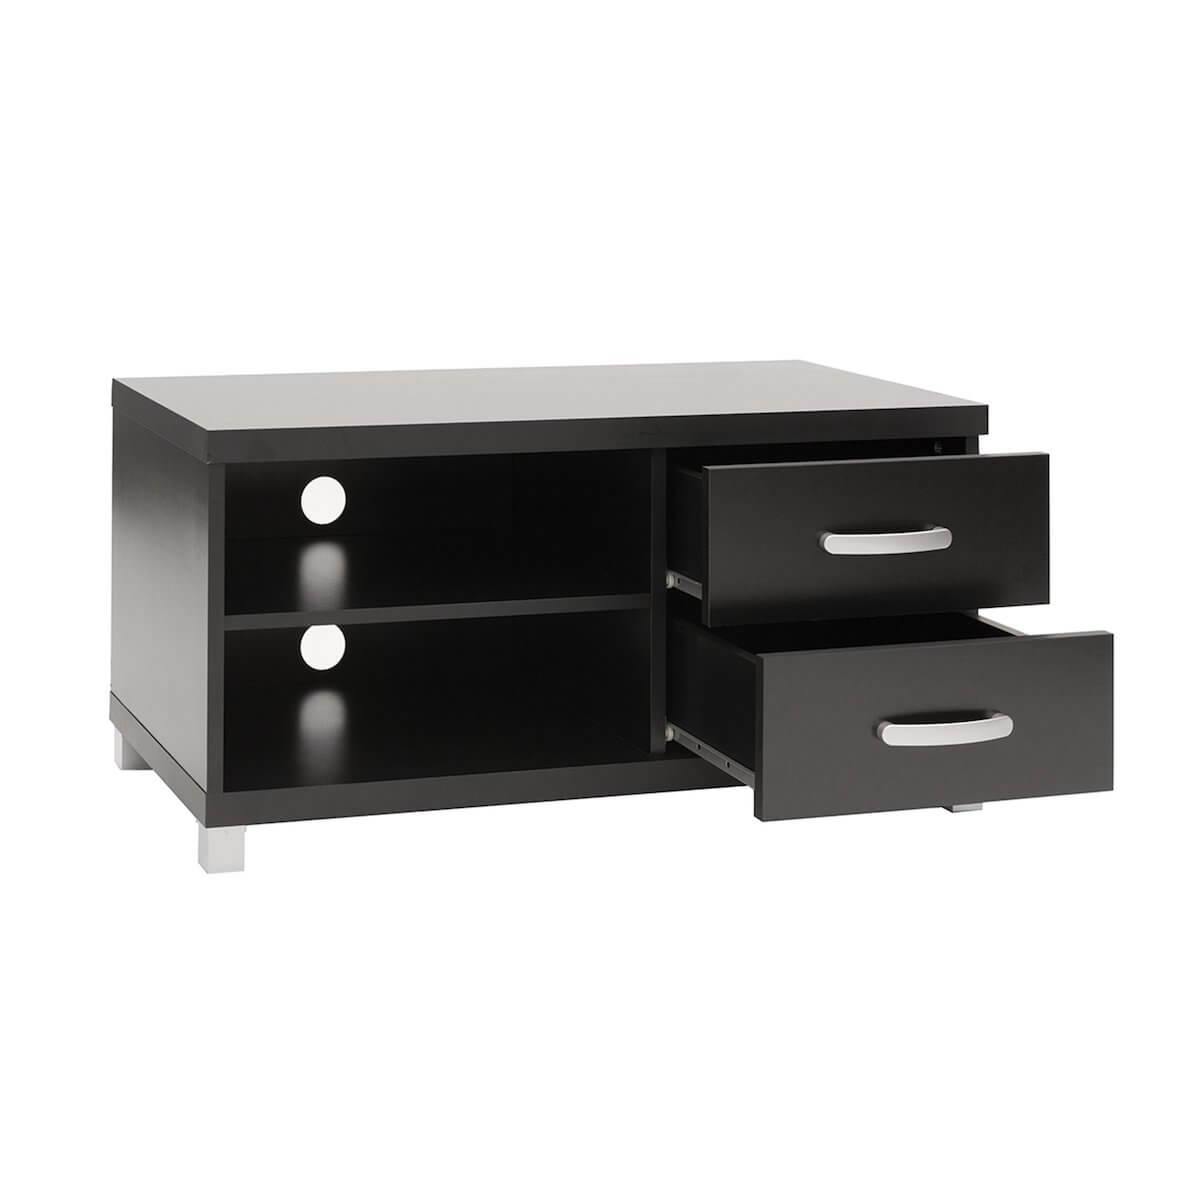 Techni Mobili Black Modern TV Stand with Storage for TVs Up To 40" RTA-8896-BK Open Drawers